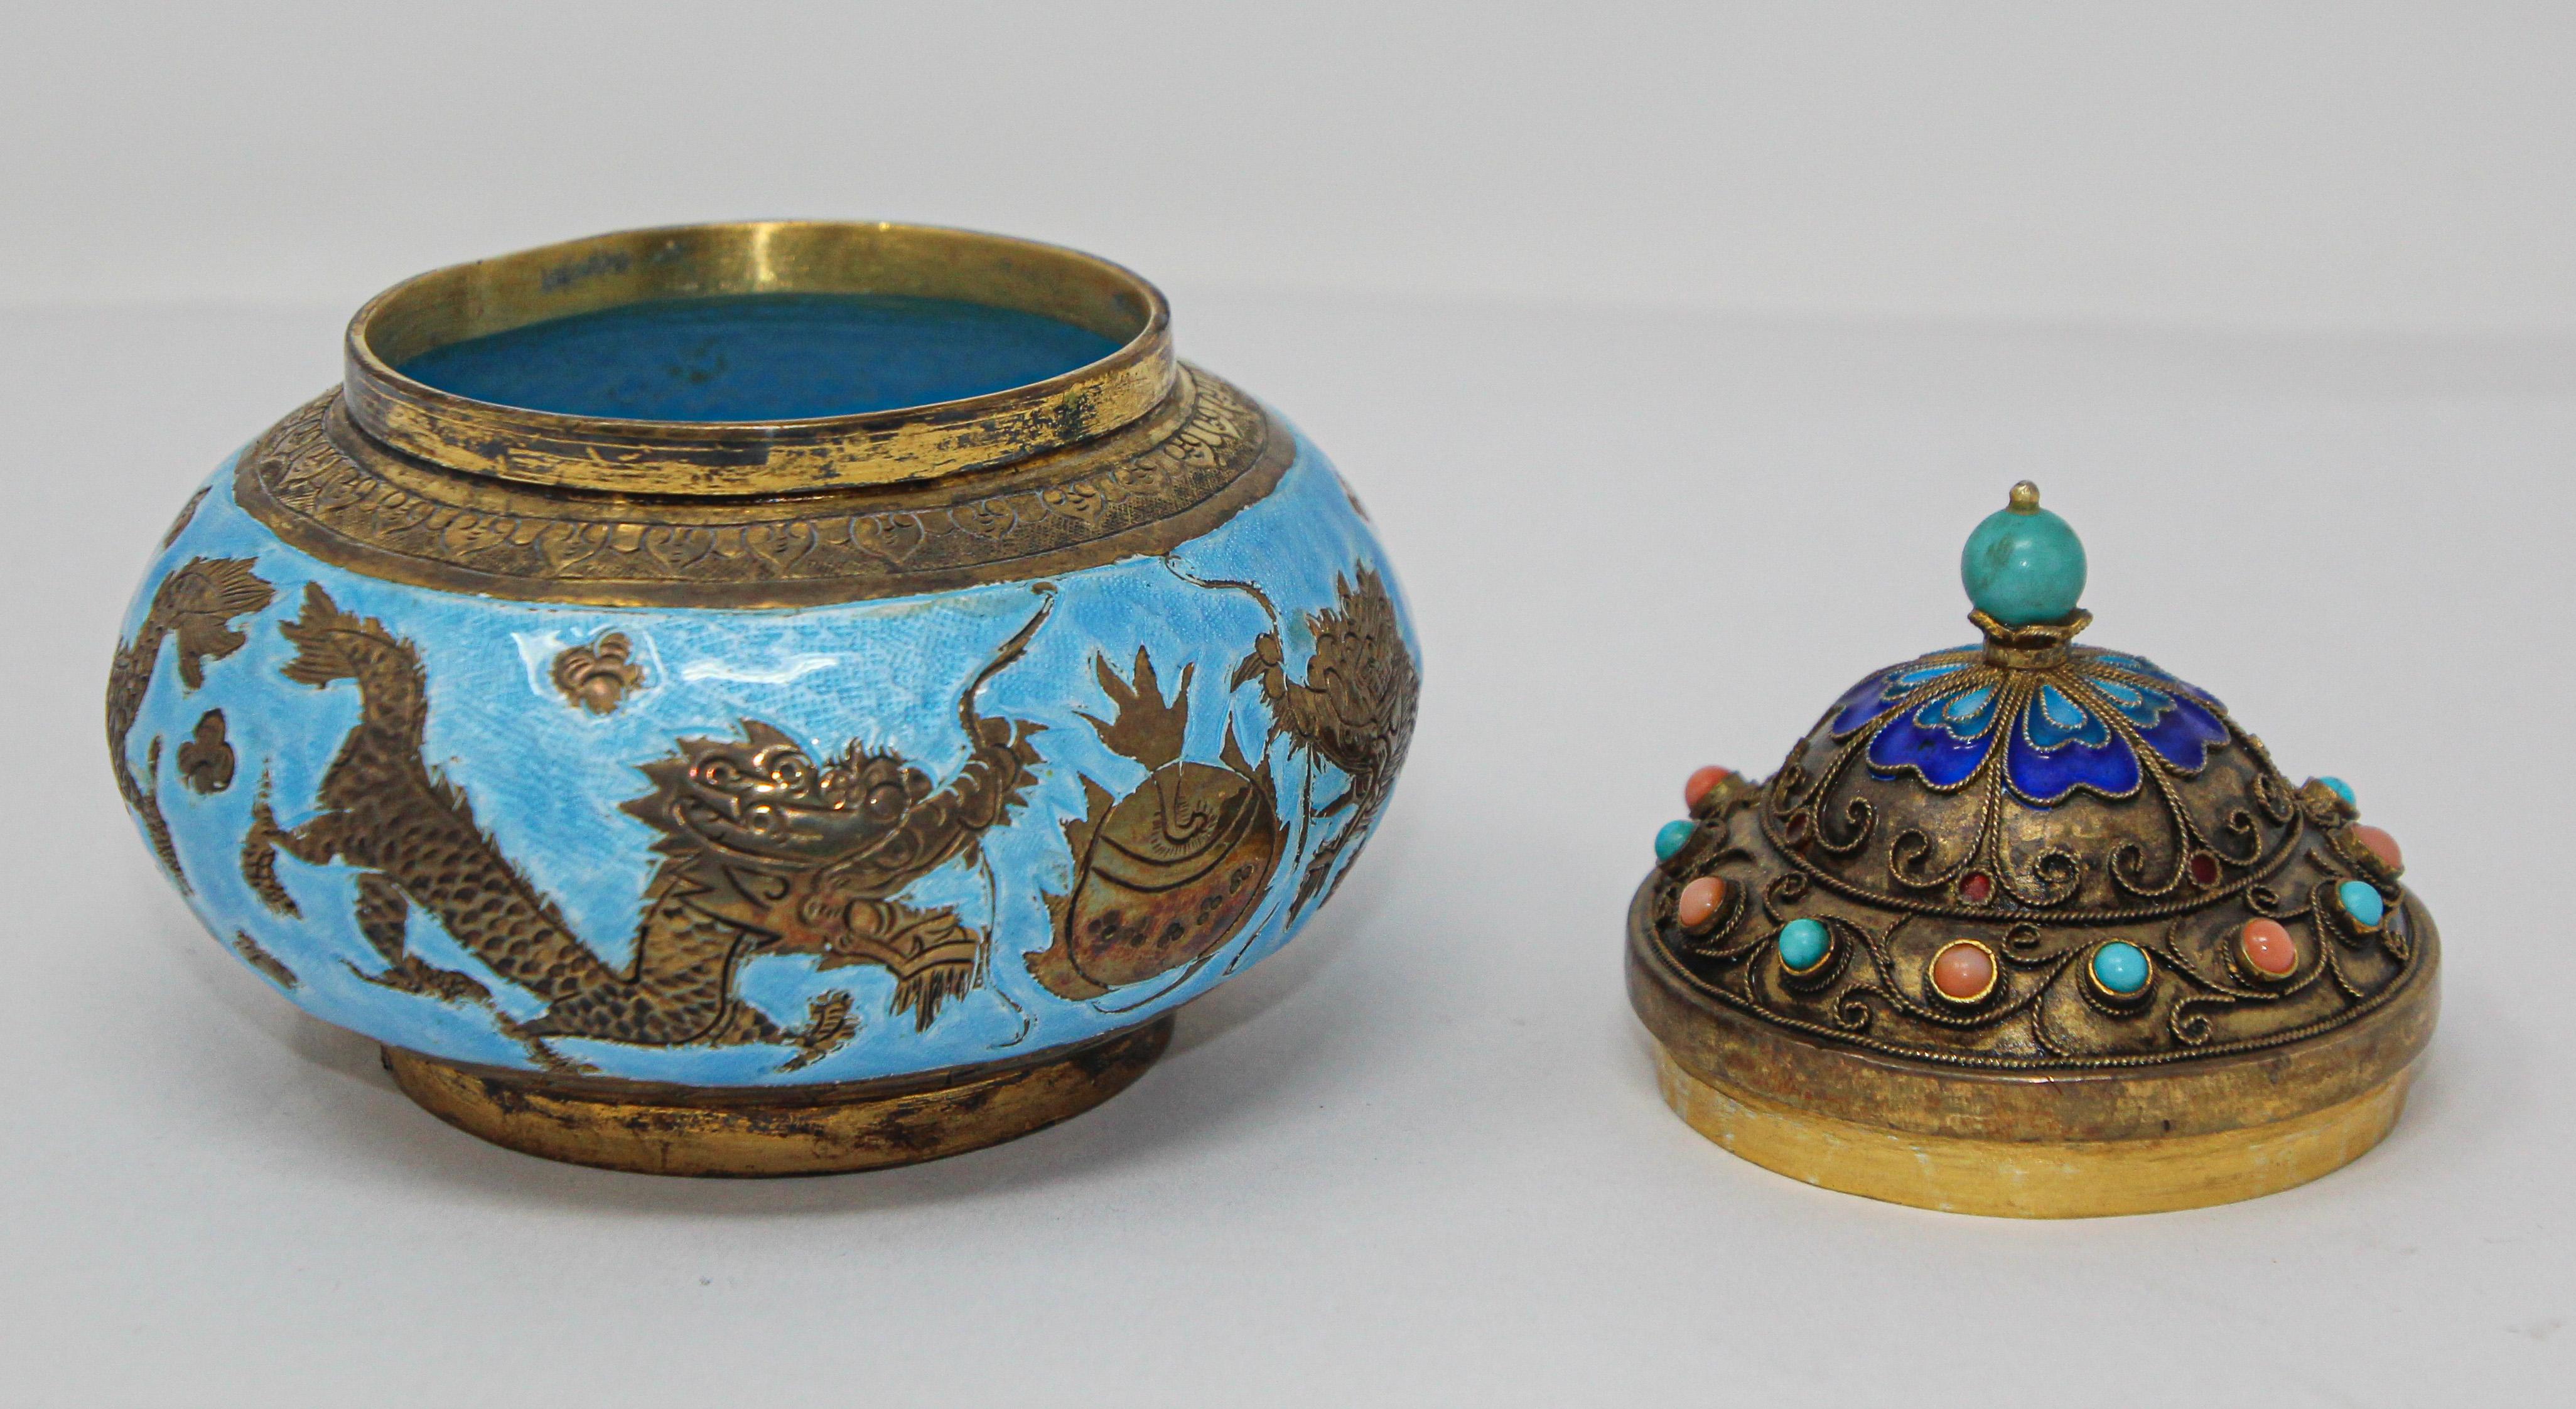 Chinoiserie Chinese Export Brass Snuff Box with Turquoise Enamel Dragons and Beads Inlaid